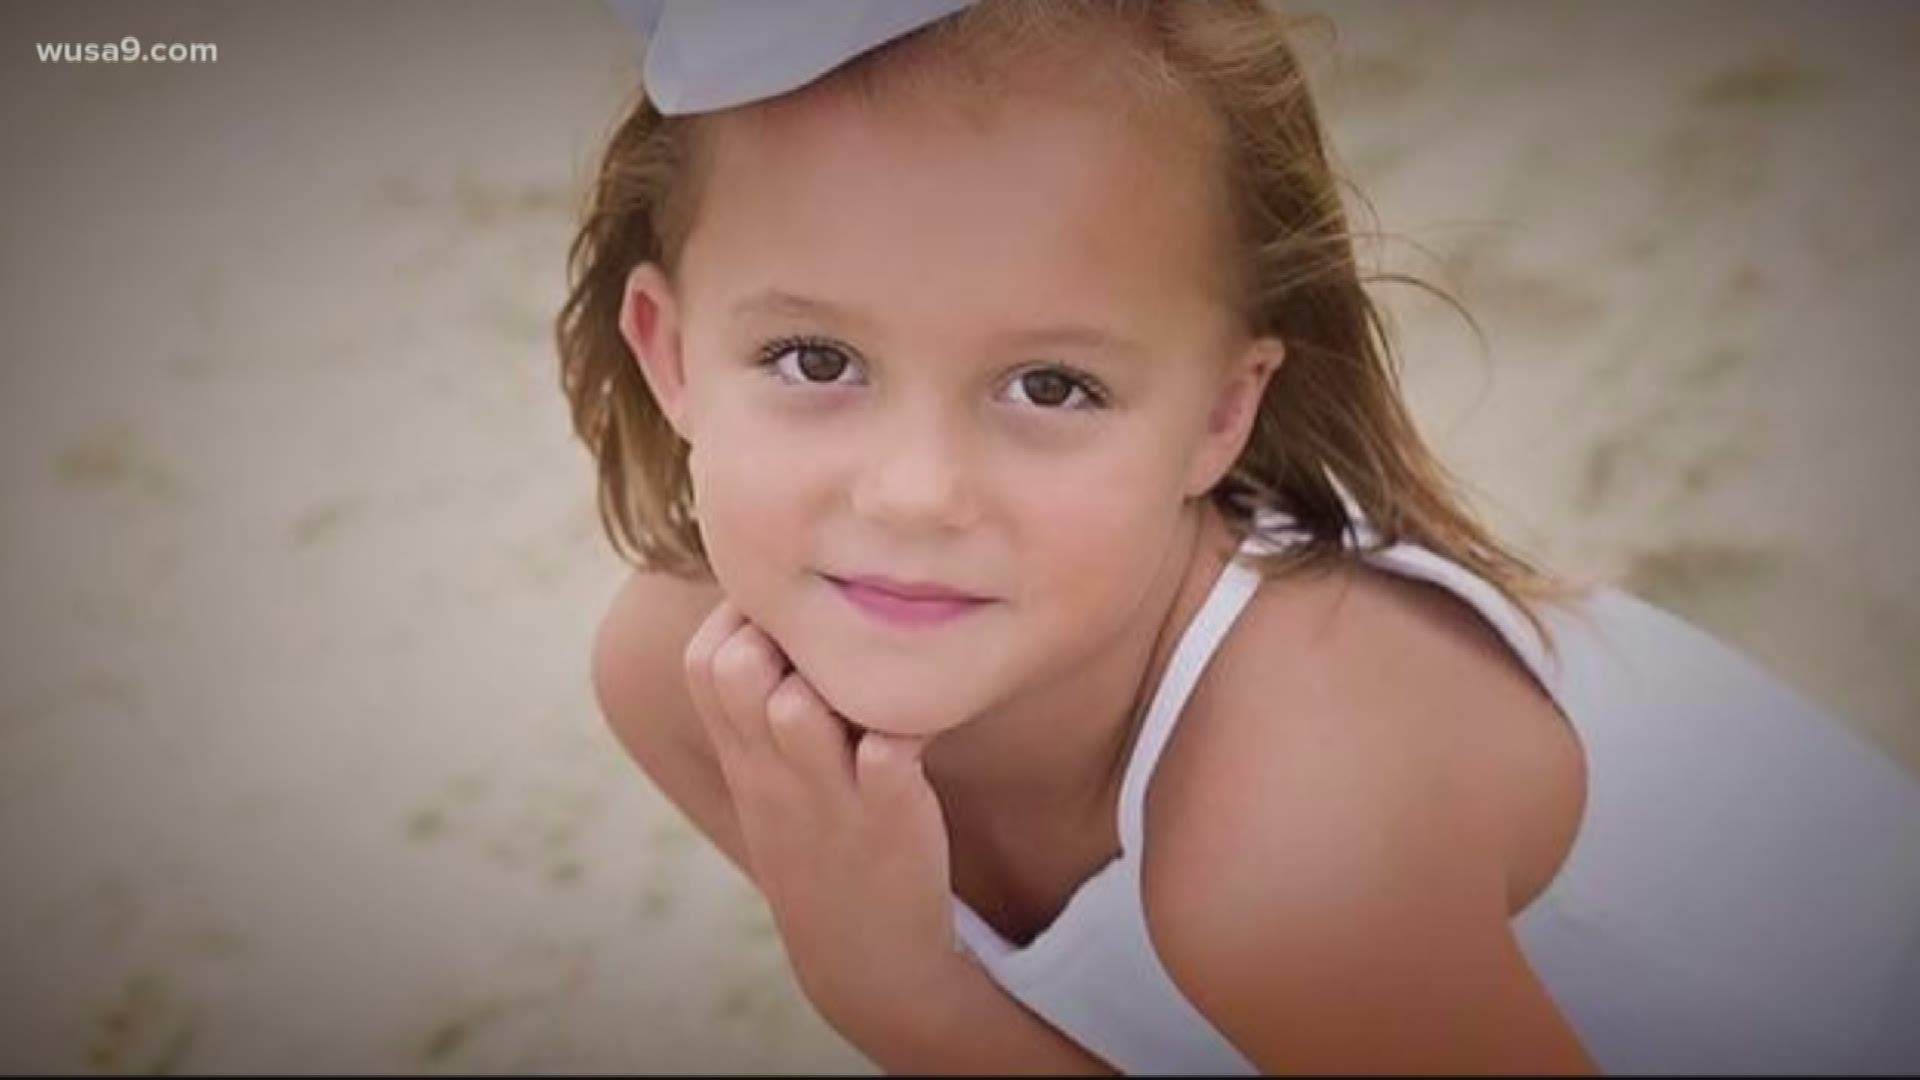 Kinsley Sandvik passed away on Feb. 14 following severe complications with the flu. Now, her mother Shannon is speaking out.